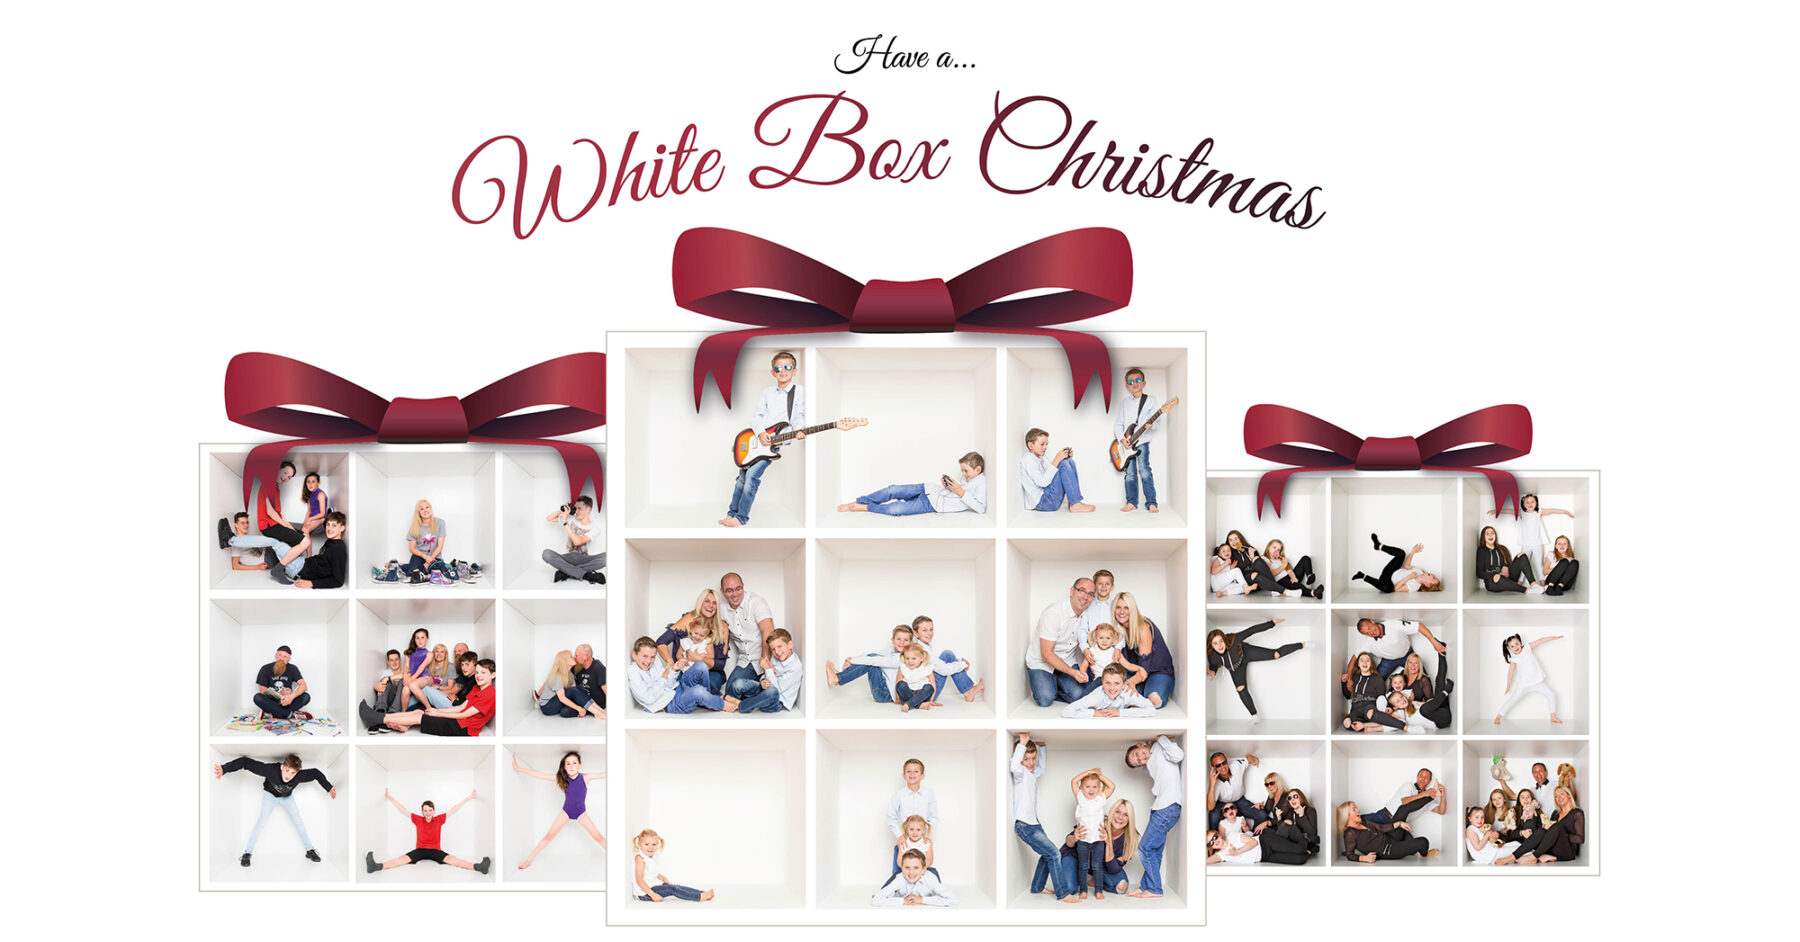 Have a special white box Christmas offer